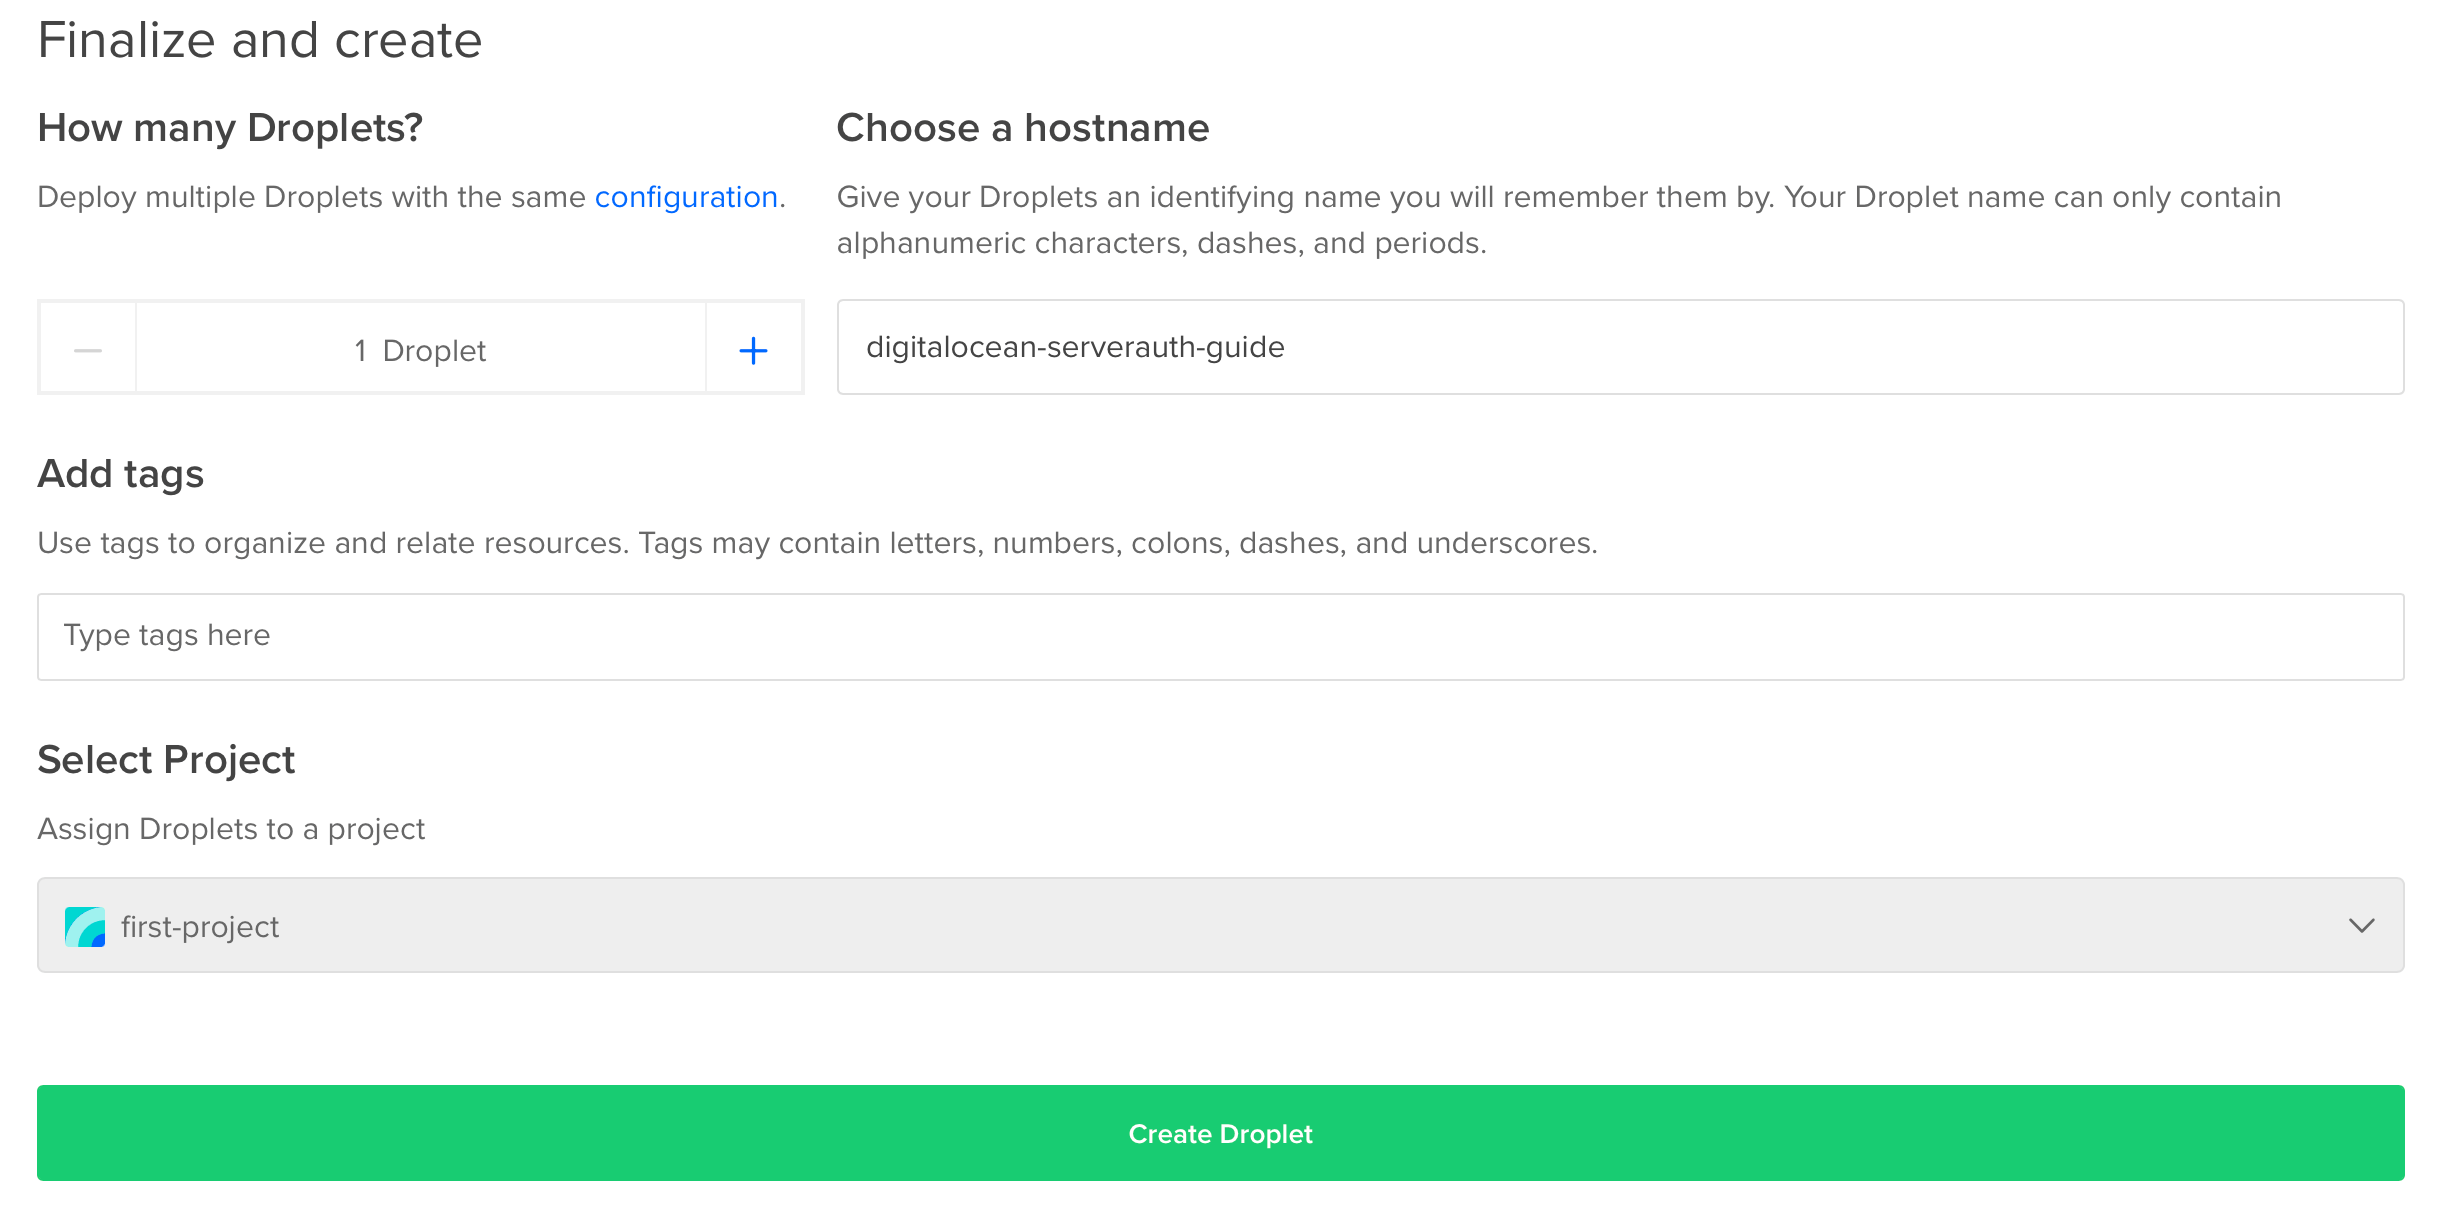 Screenshot showing choosing a hostname and creating a droplet